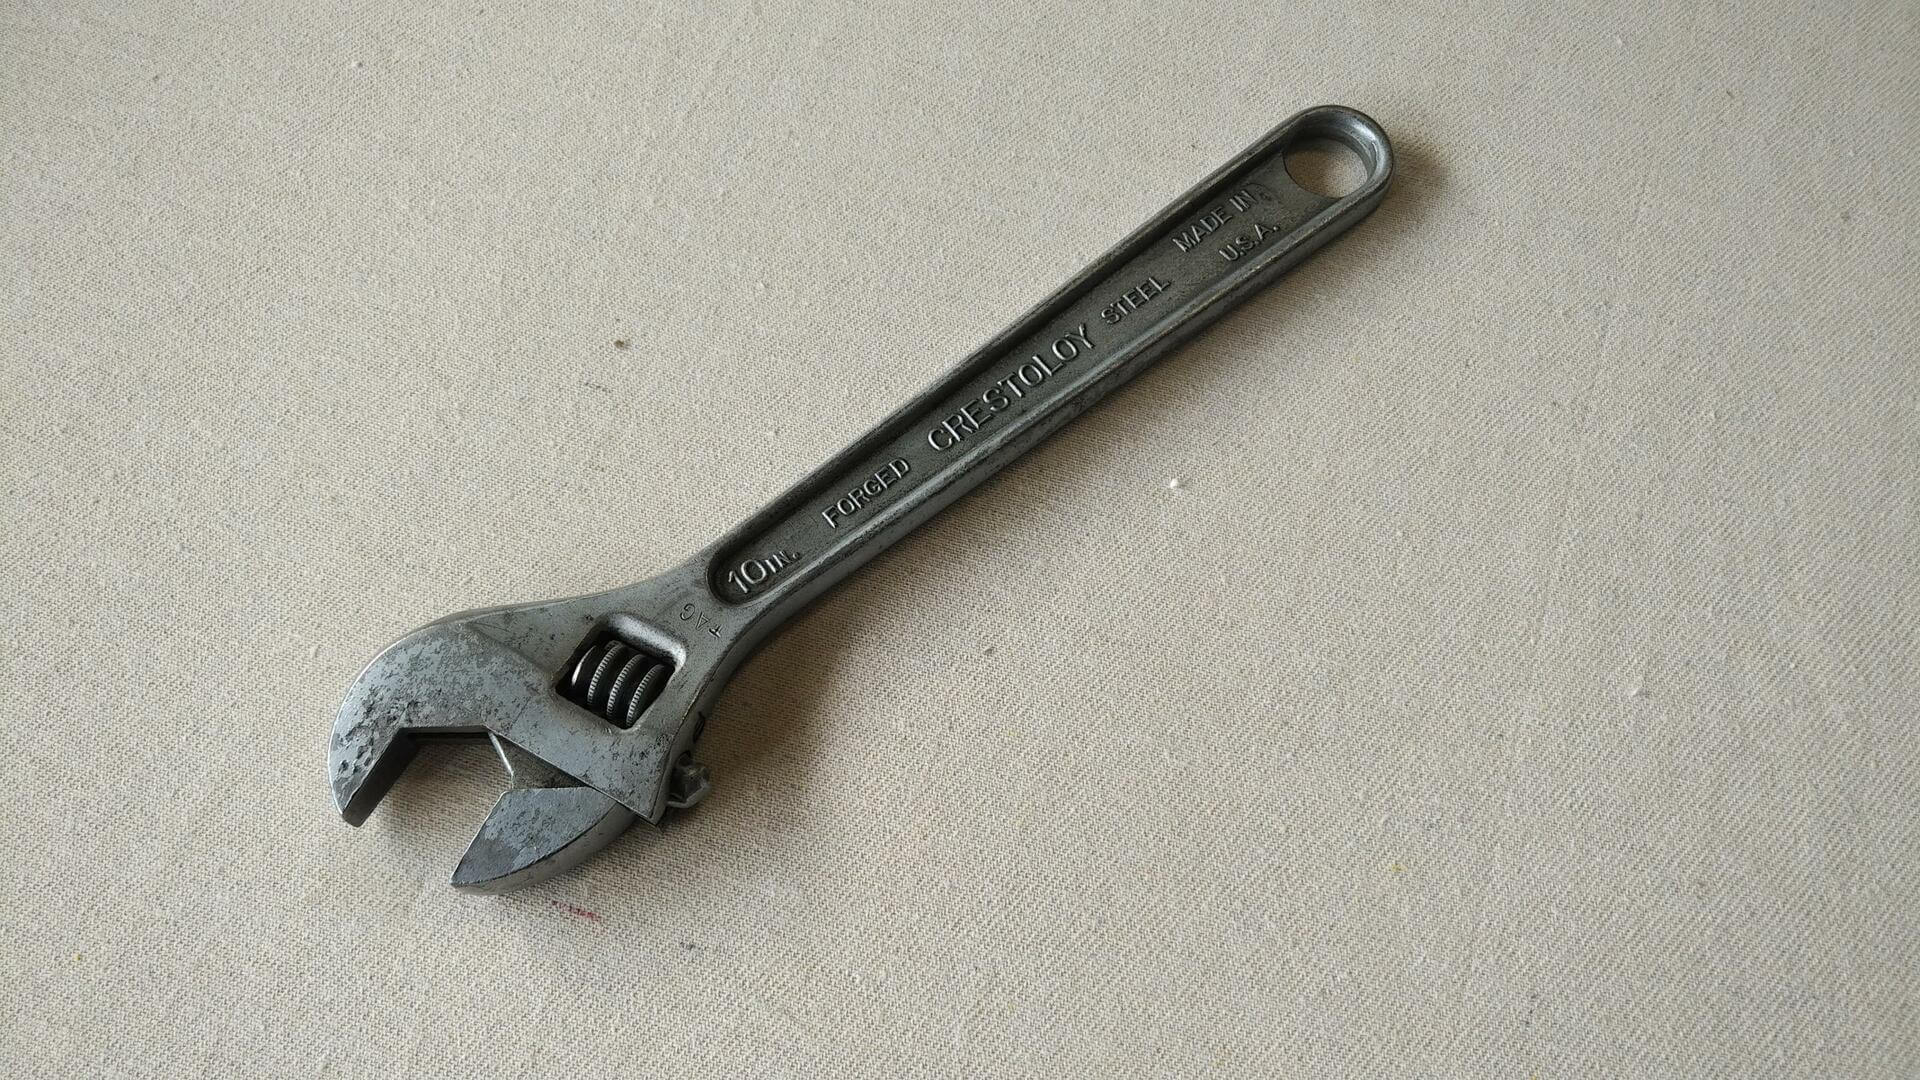 Antique Crestoloy adjustable wrench 10" by Crescent Tool Company from Jamestown, NY. Vintage made in USA collectible automotive and plumbing hand tools